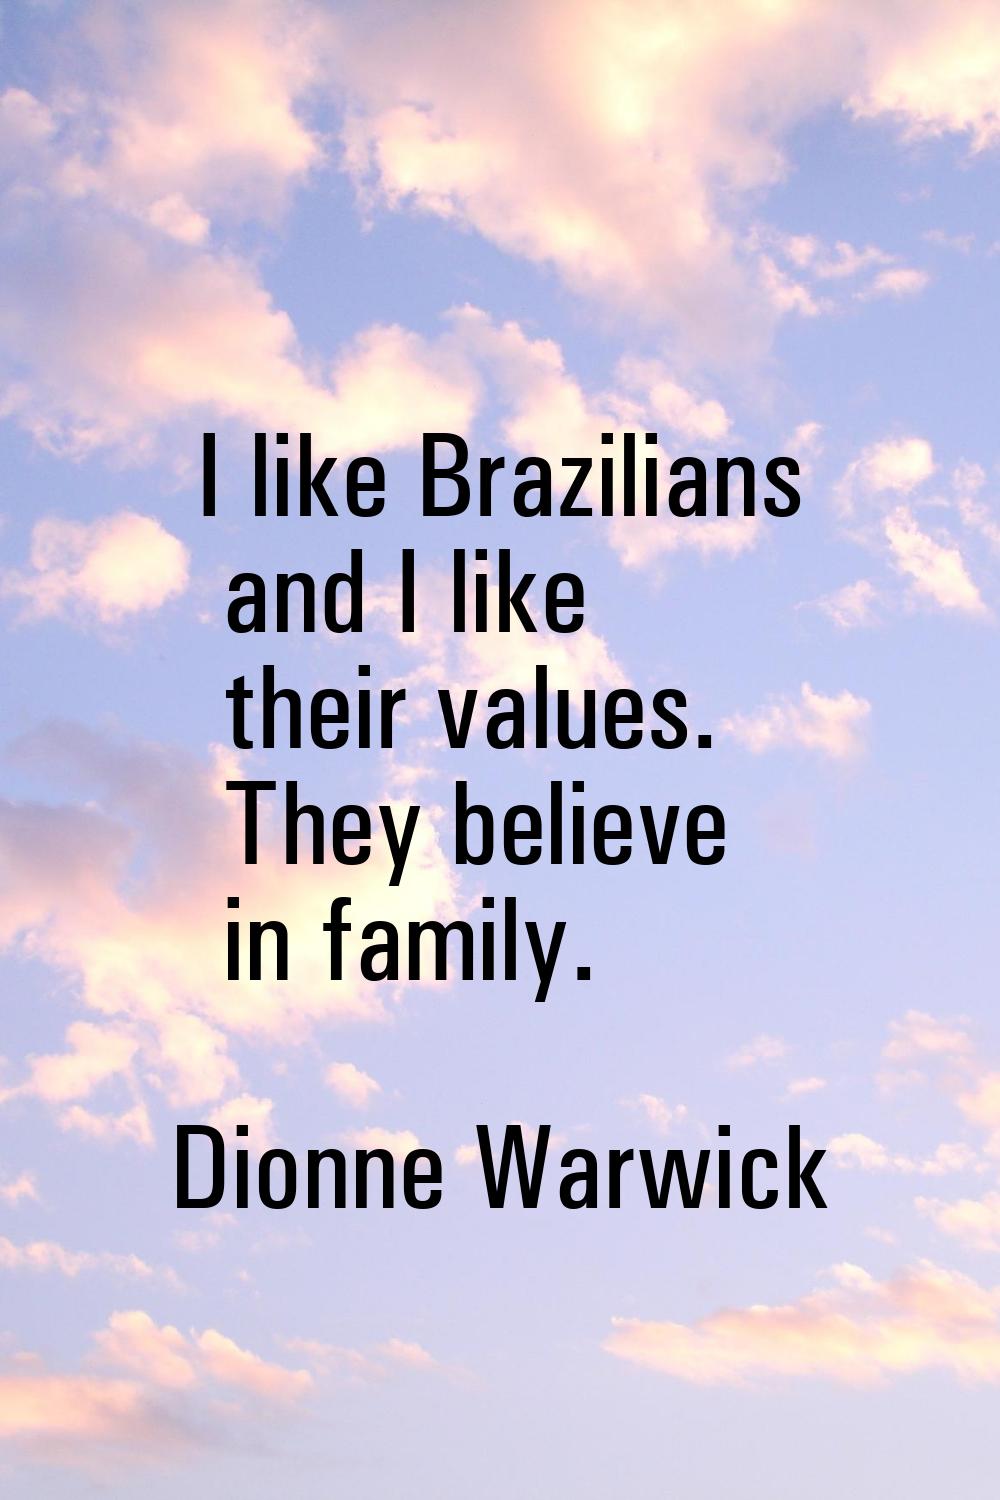 I like Brazilians and I like their values. They believe in family.